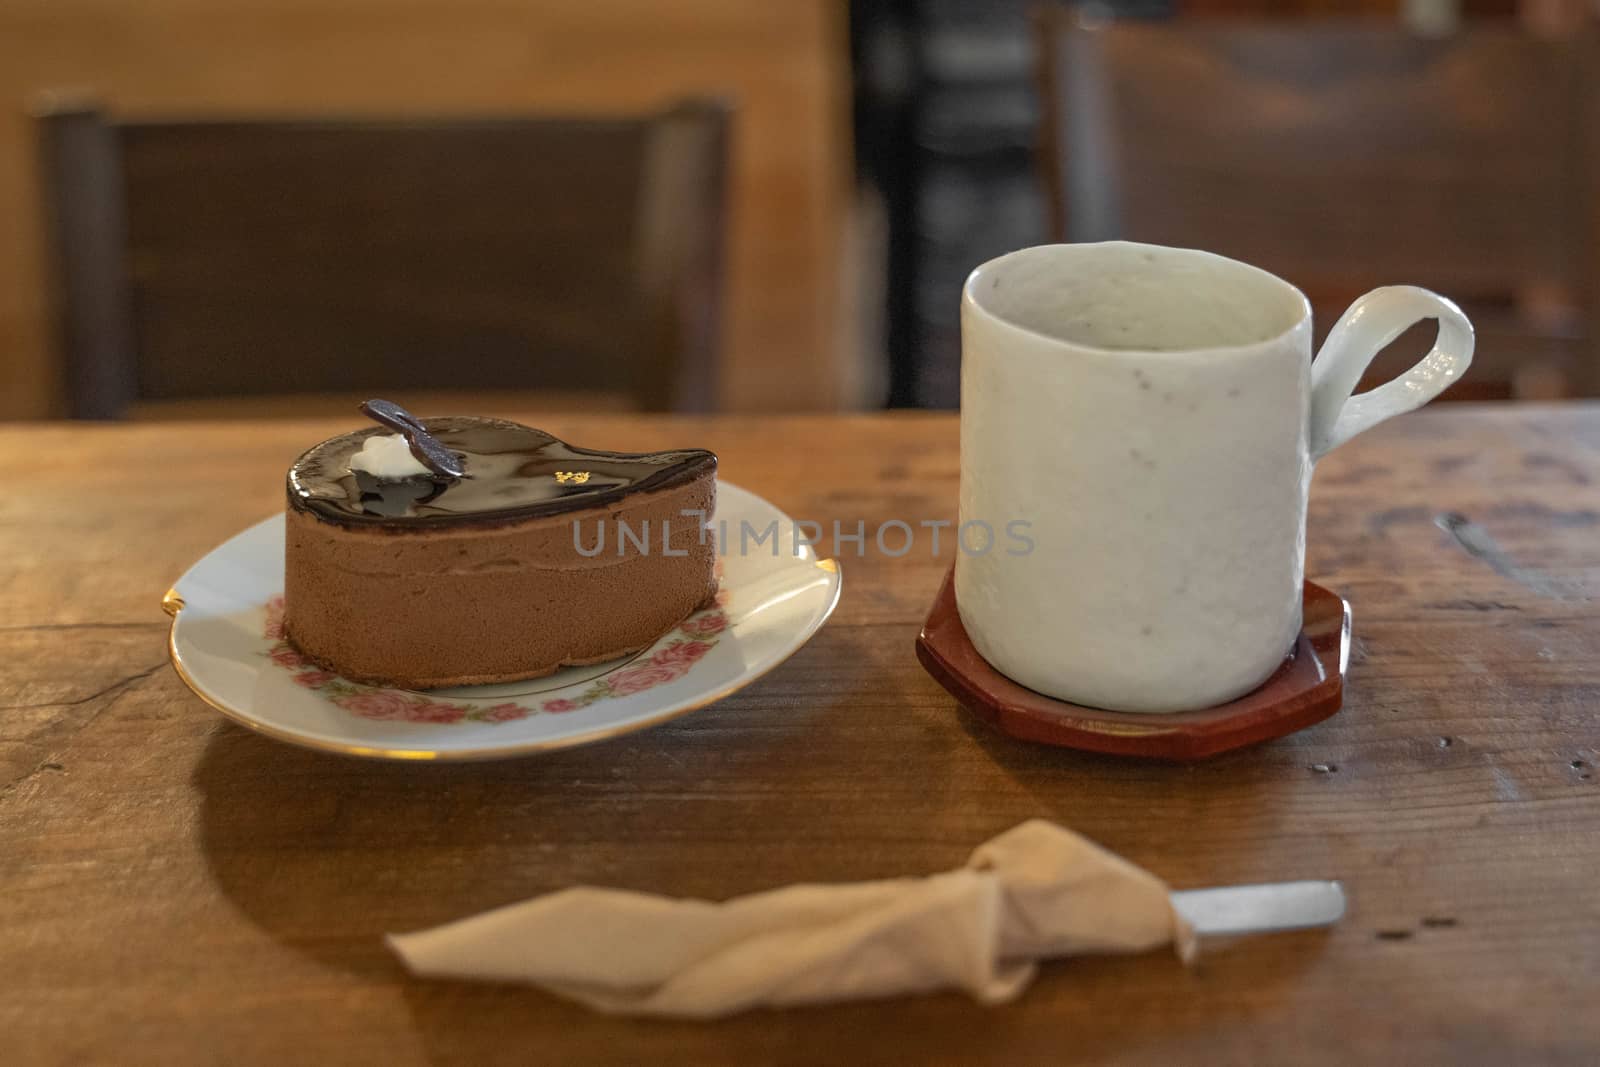 Cake and cup of coffee on wooden table